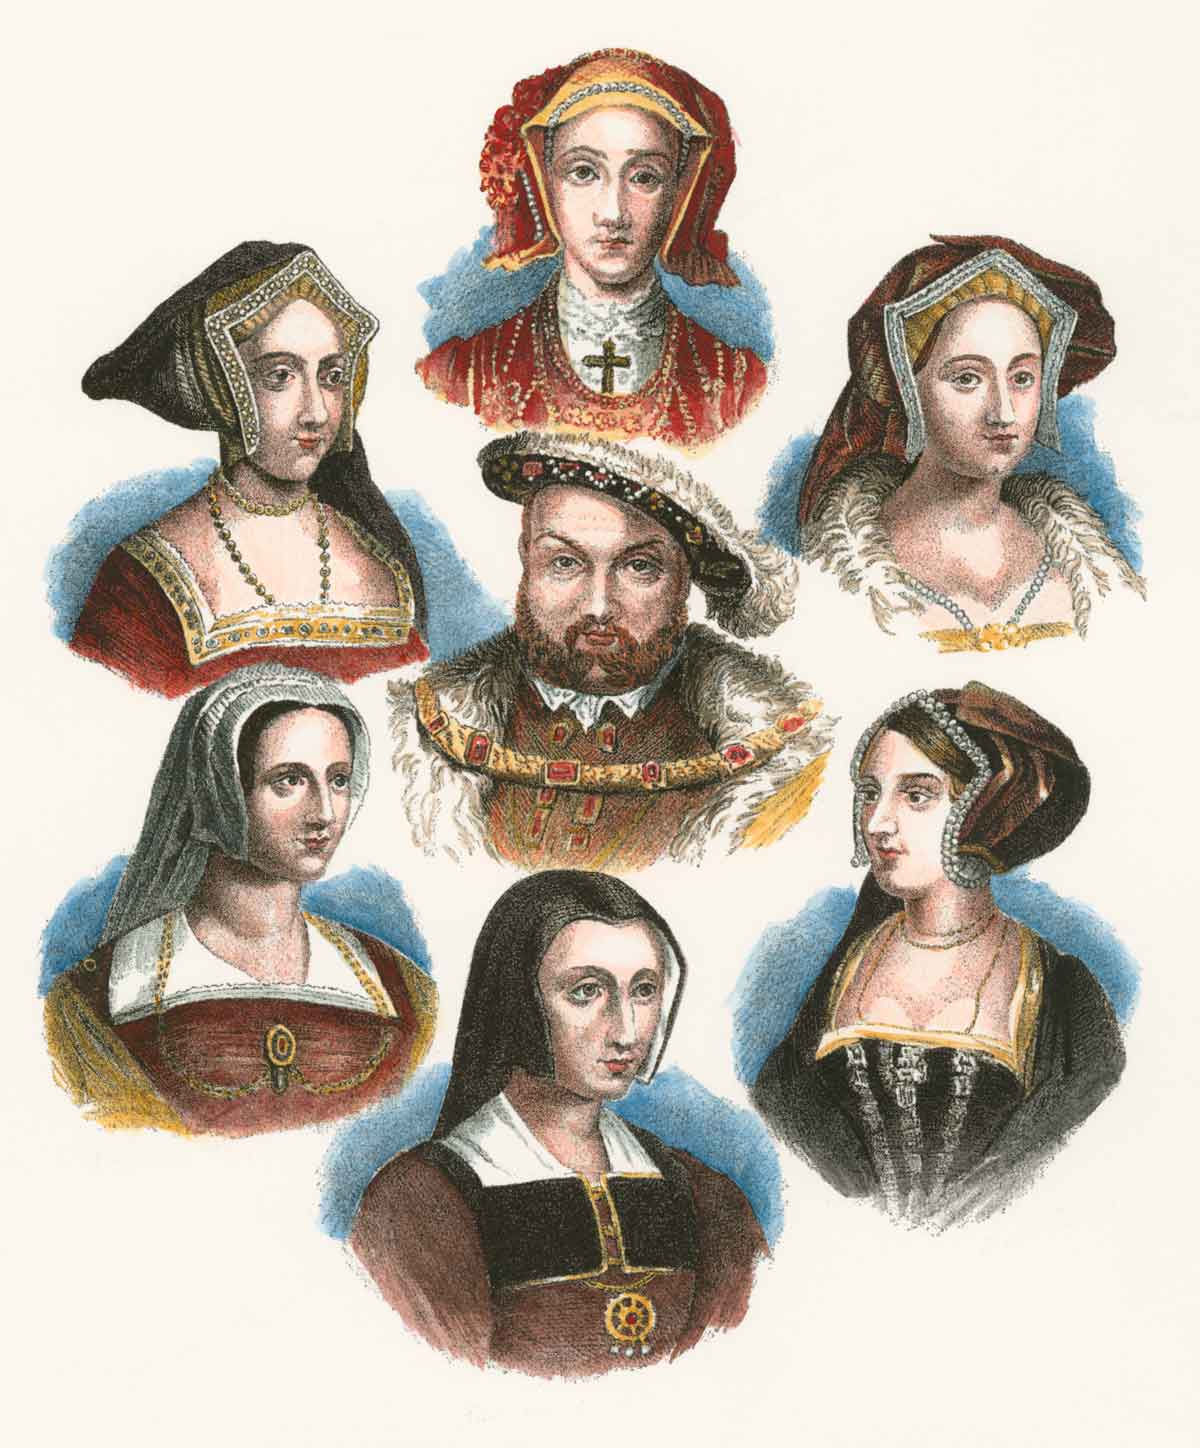 Clockwise from top: Anne of Cleves, Catherine Howard, Anne Boleyn, Catherine of Aragon, Kateryn Parr and Jane Seymour. Lithograph, c.1860. akg-images.